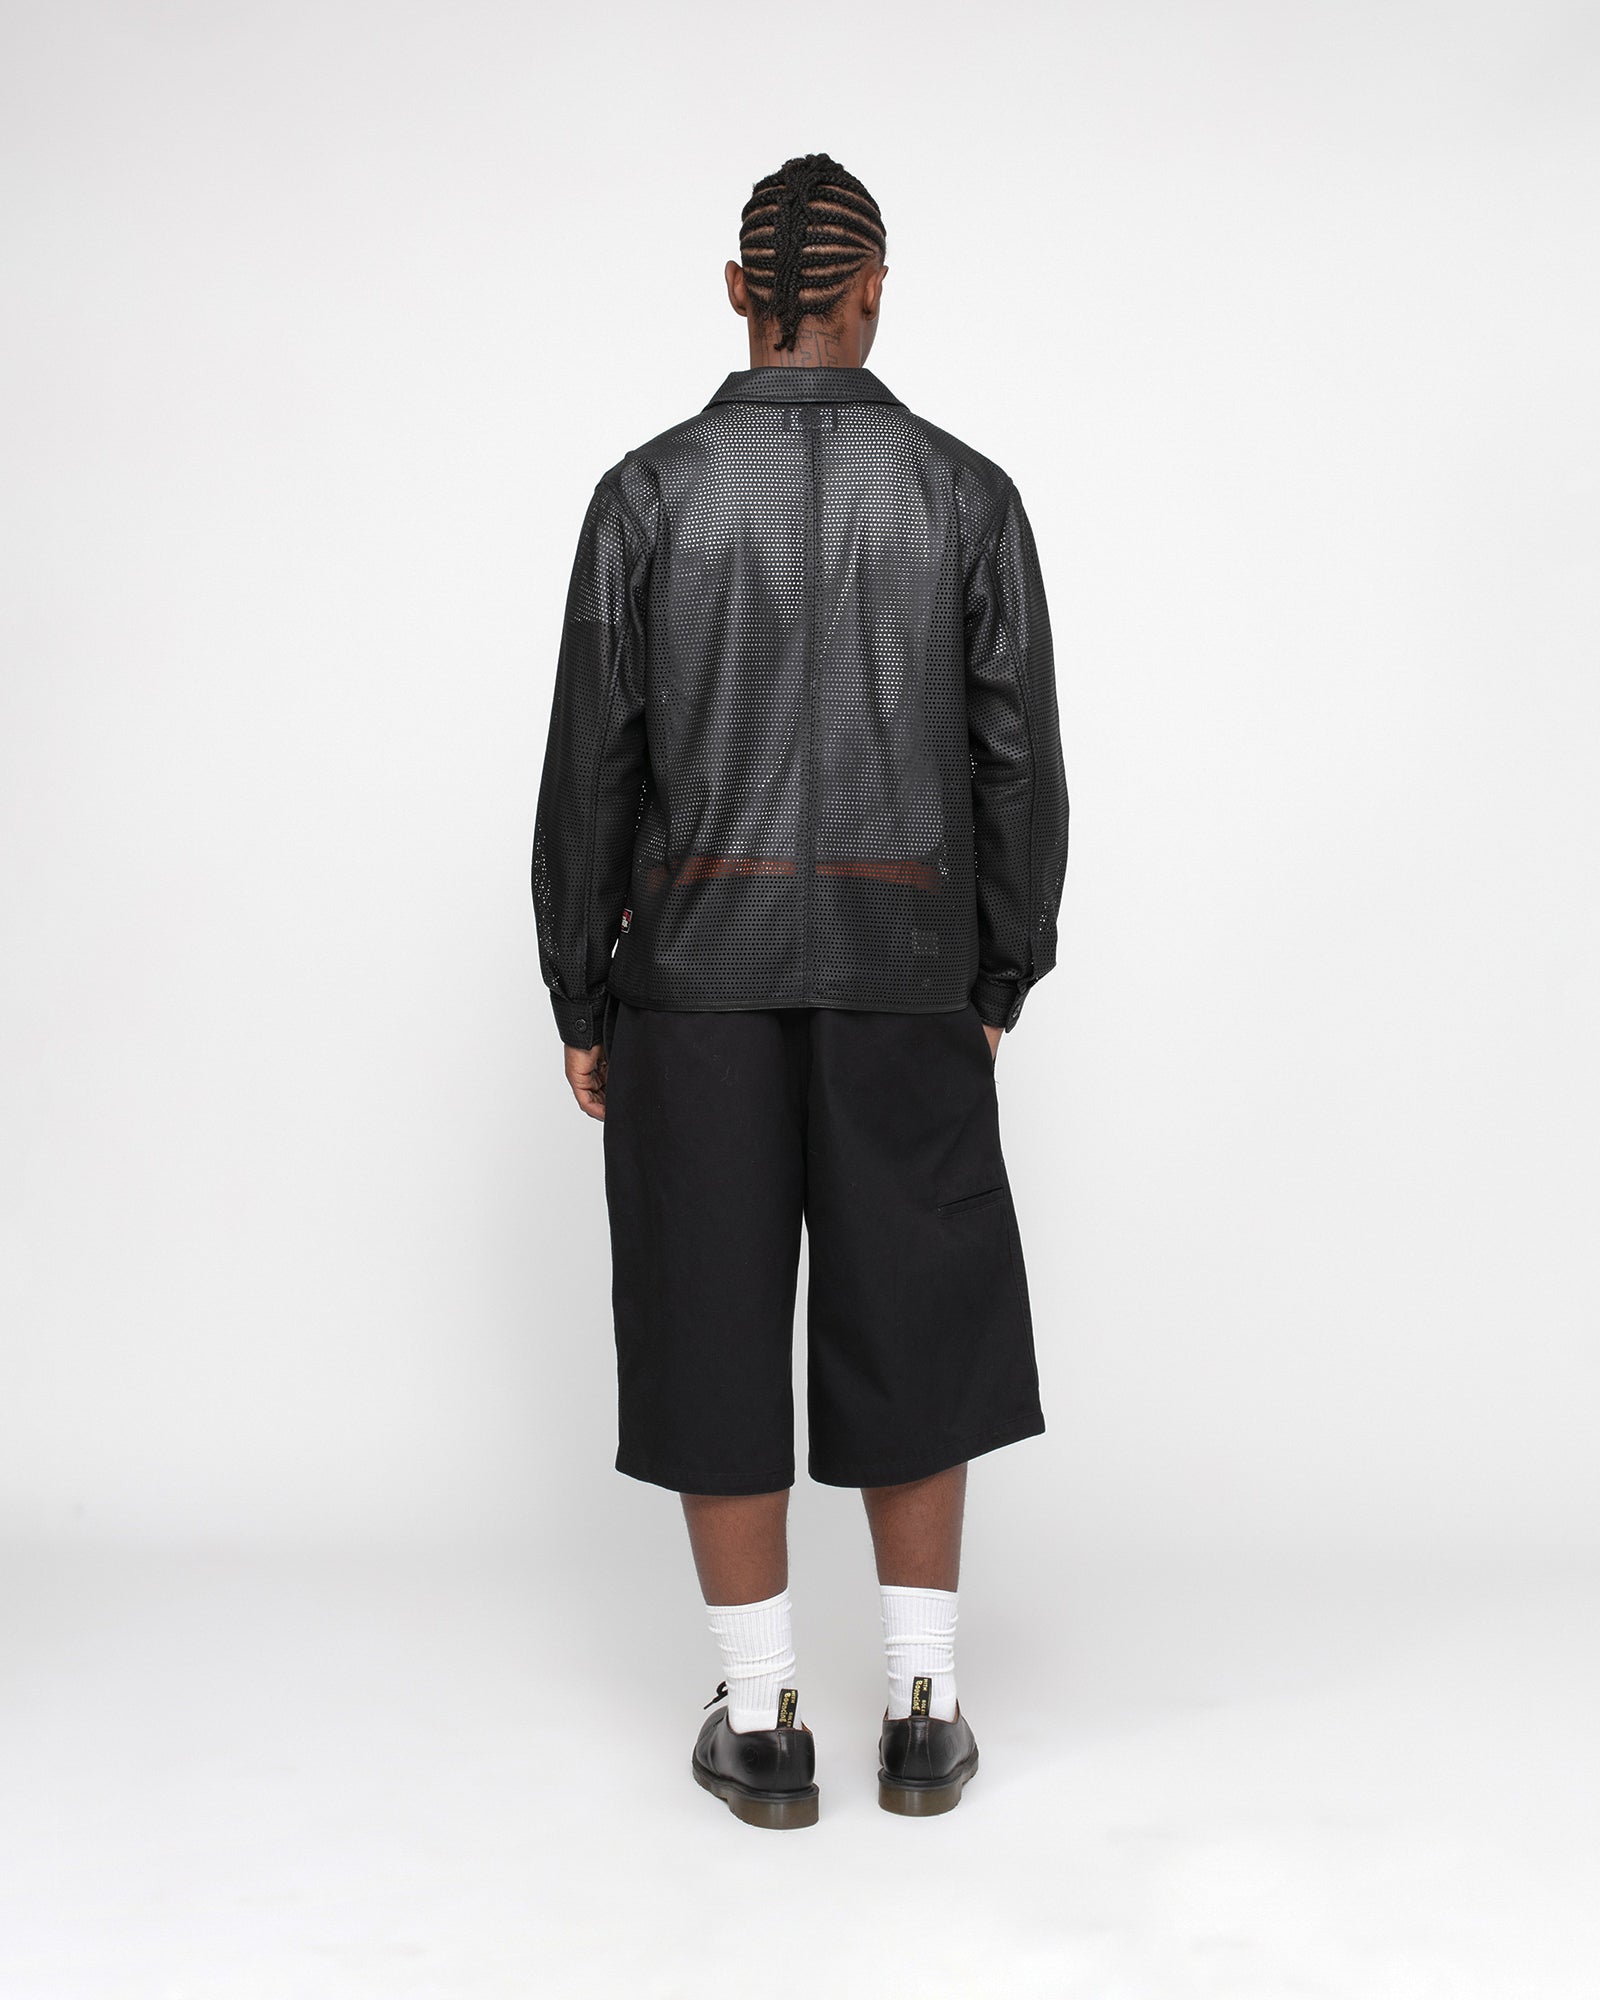 Stüssy Zip Shirt Perforated Leather Black Tops